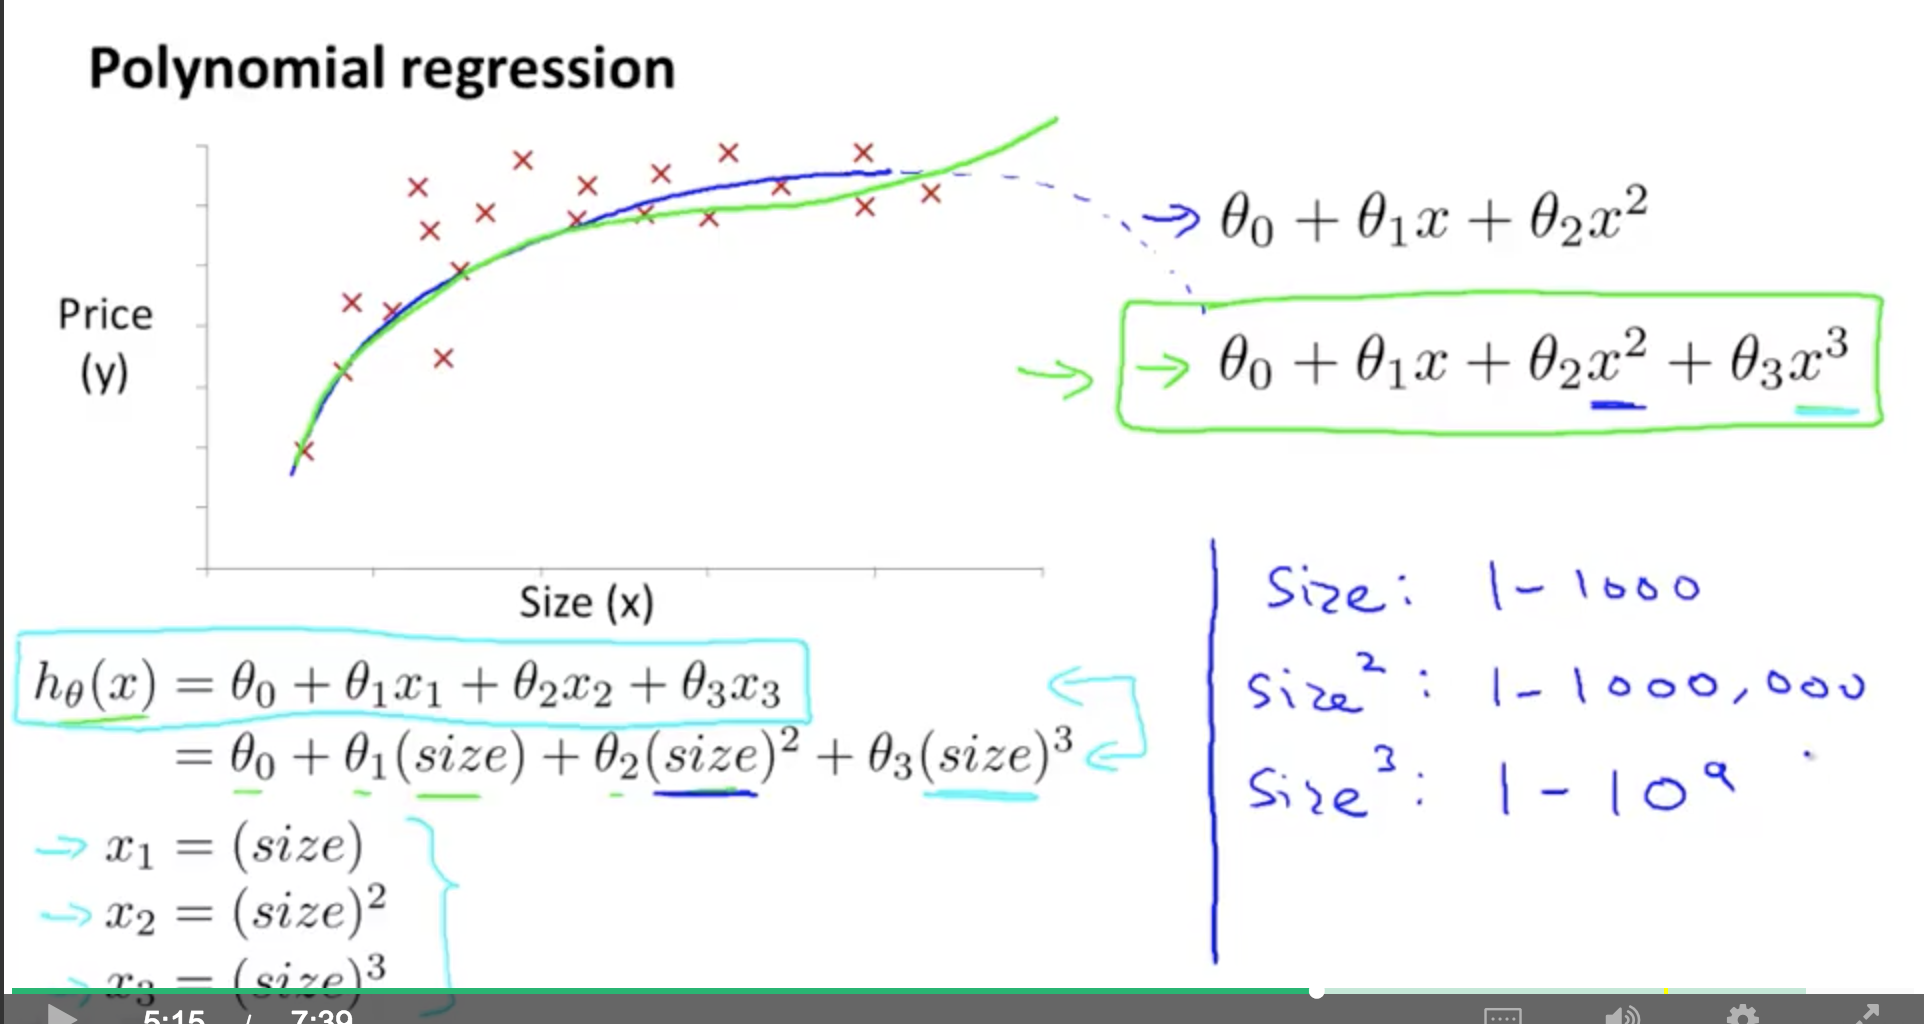 hypothesis testing in multivariate linear regression